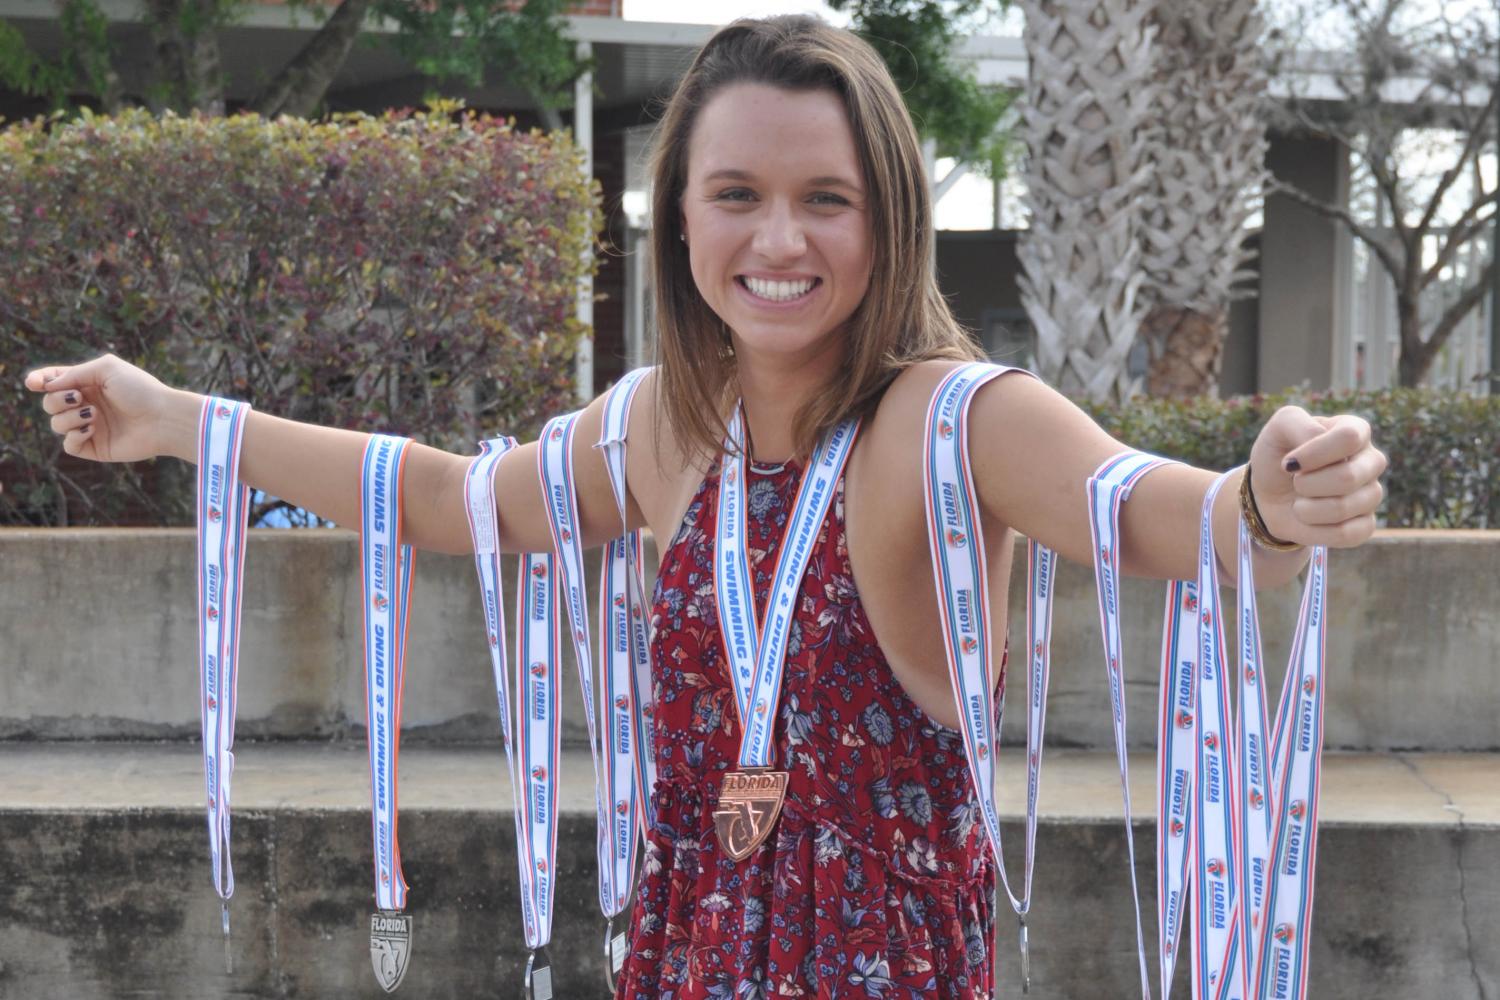 Boddiford+with+her+collection+of+medals+won+throughout+her+four+years+competing+in+high+school+swimming+tournaments.